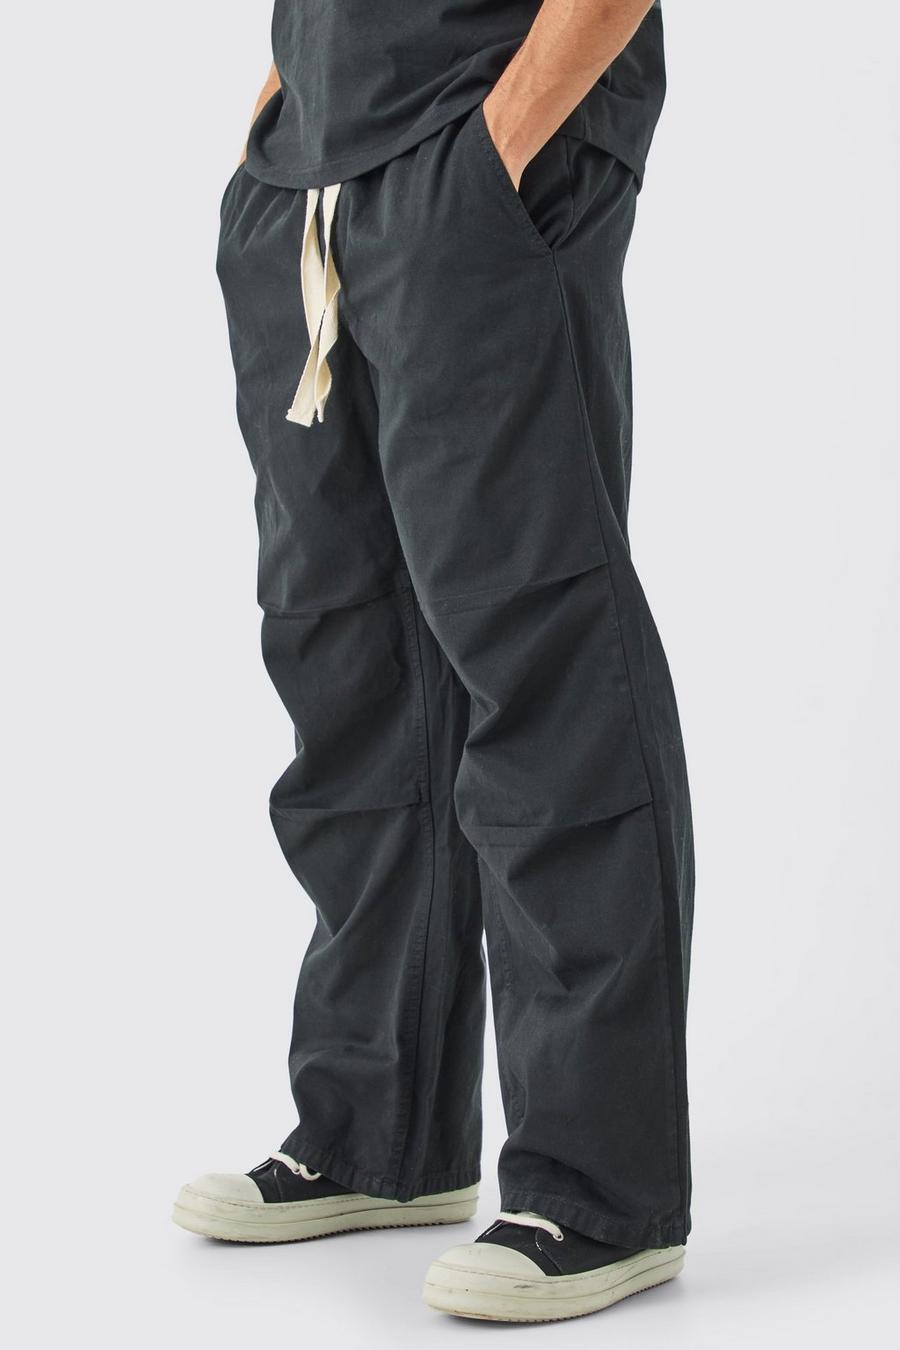 Charcoal Elastic Waist Contrast Drawcord Extreme Baggy Pants